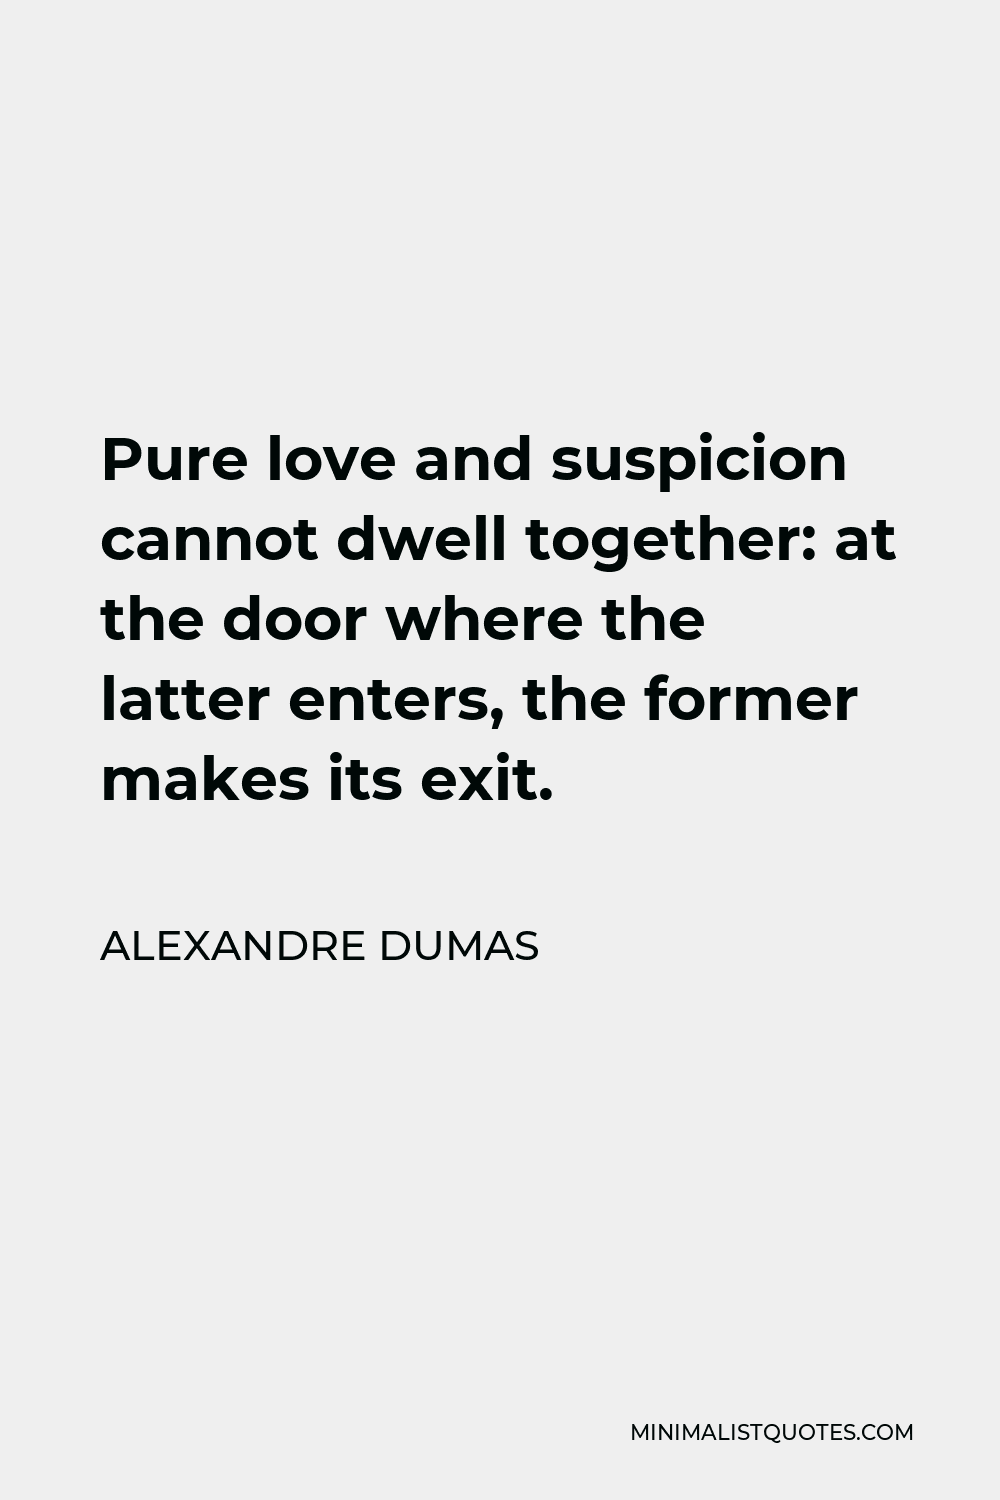 Alexandre Dumas Quote - Pure love and suspicion cannot dwell together: at the door where the latter enters, the former makes its exit.